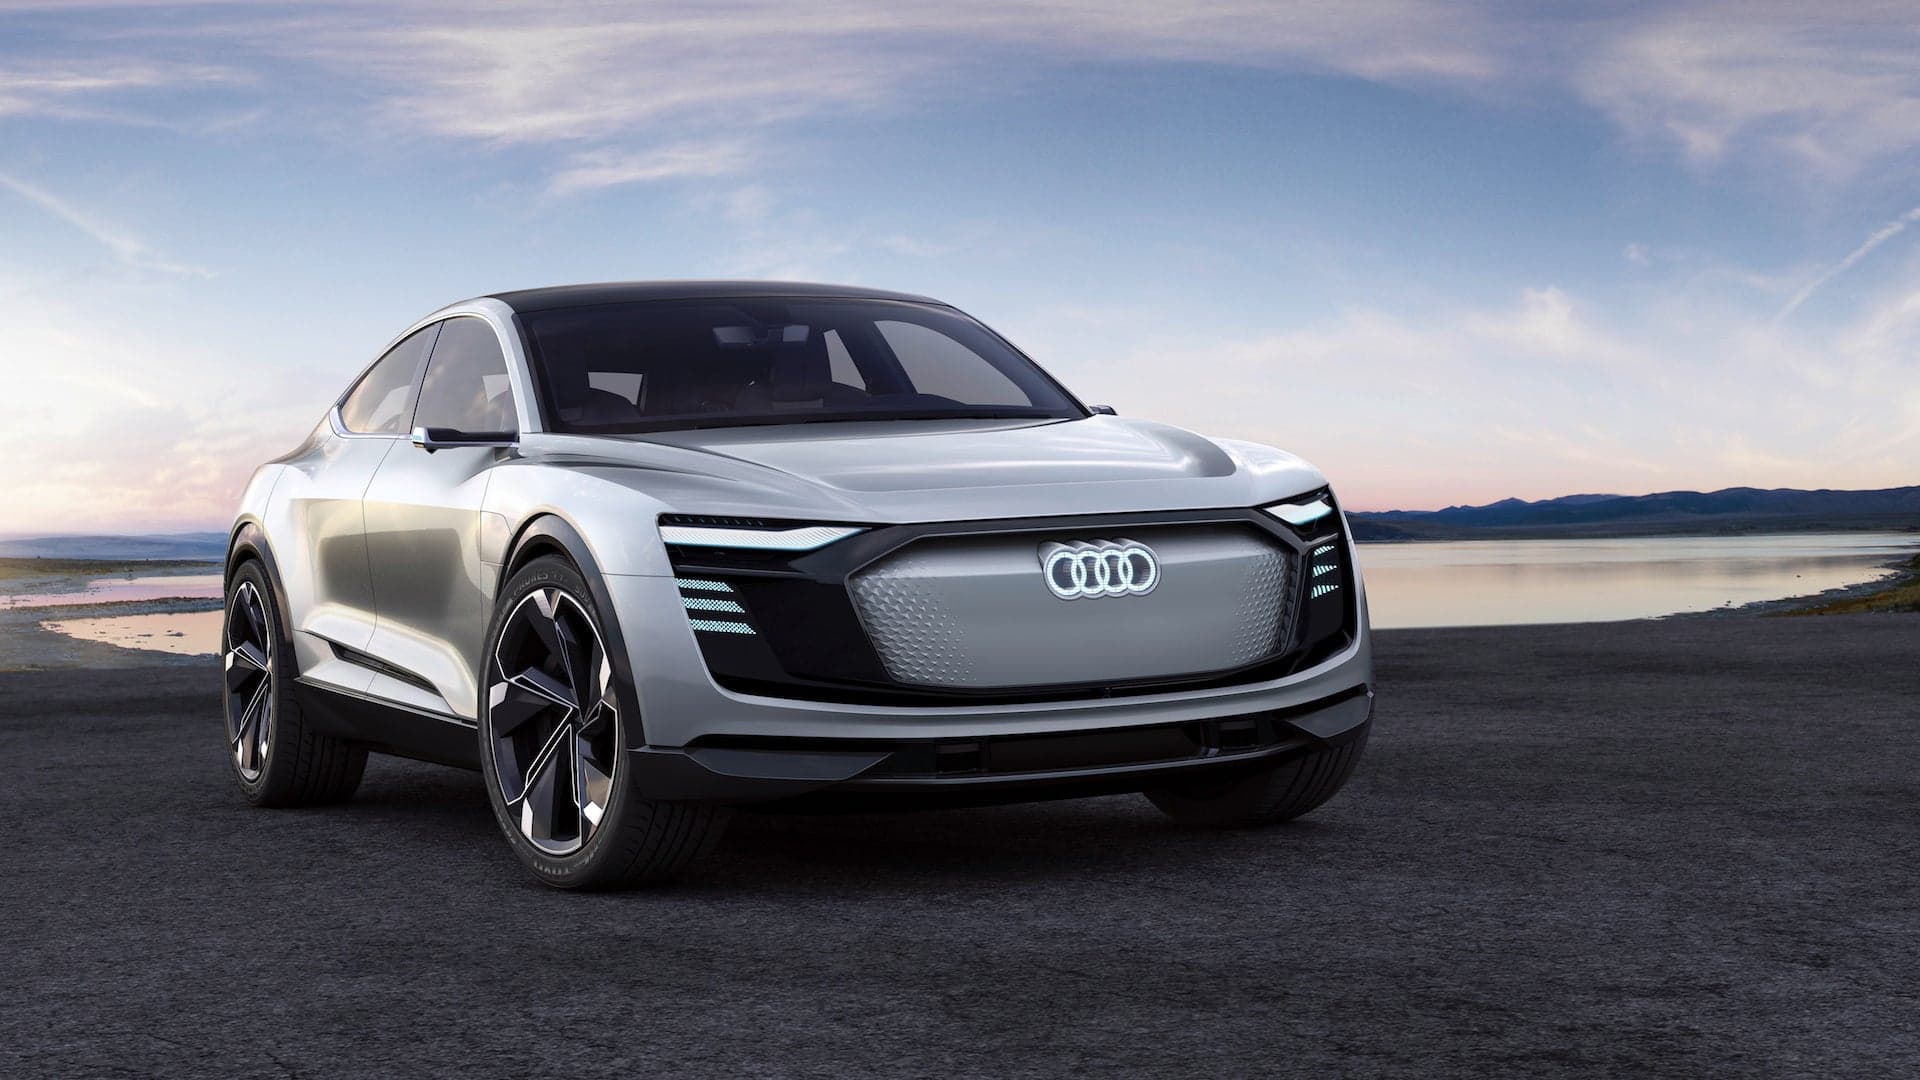 Audi E-Tron Sportback Concept Is a Production-Bound Electric Crossover Coupe